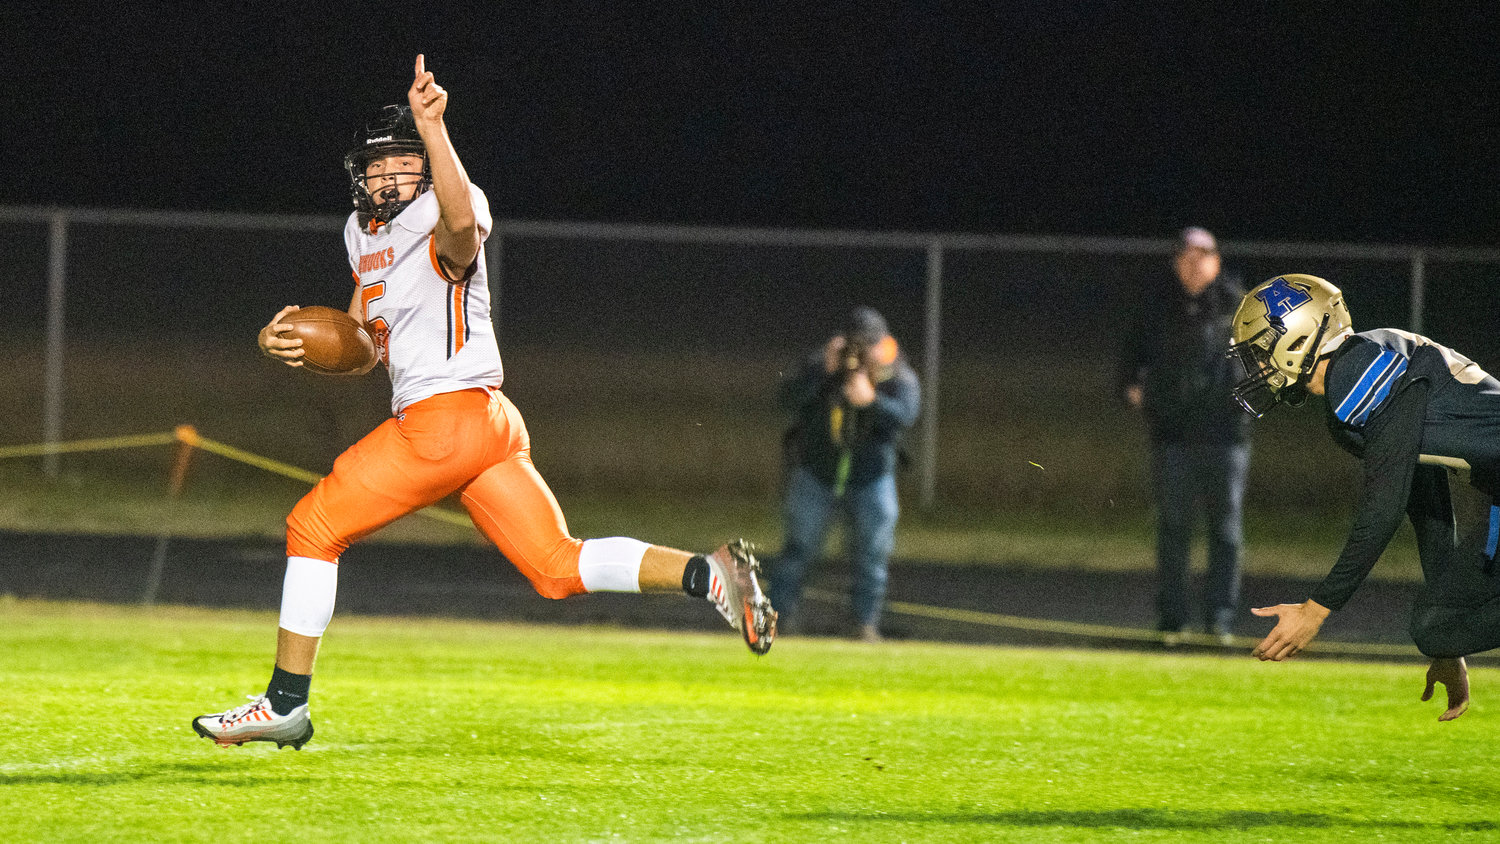 Kalama quarterback Aiden Brown (6) holds up a finger while running for the end zone Thursday night during a game against Adna at Pirate Stadium.